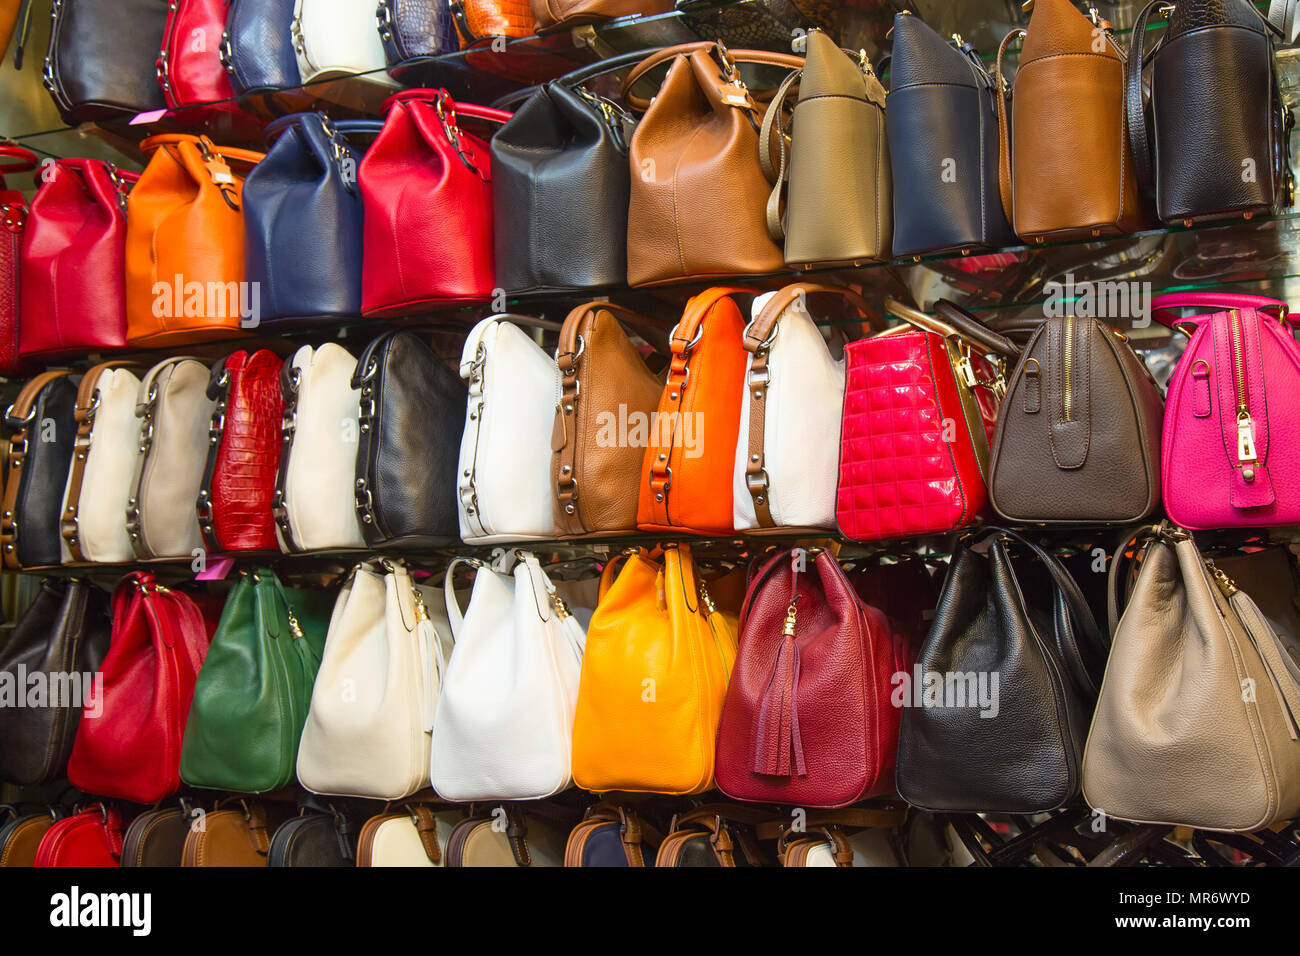 ISTANBUL - MAY 3: Faked bags on sale on the narrow street around Grand Bazaar on Mal 3, 2015 in Istanbul, Turkey. Area around Grand Bazaar is well kno Stock Photo